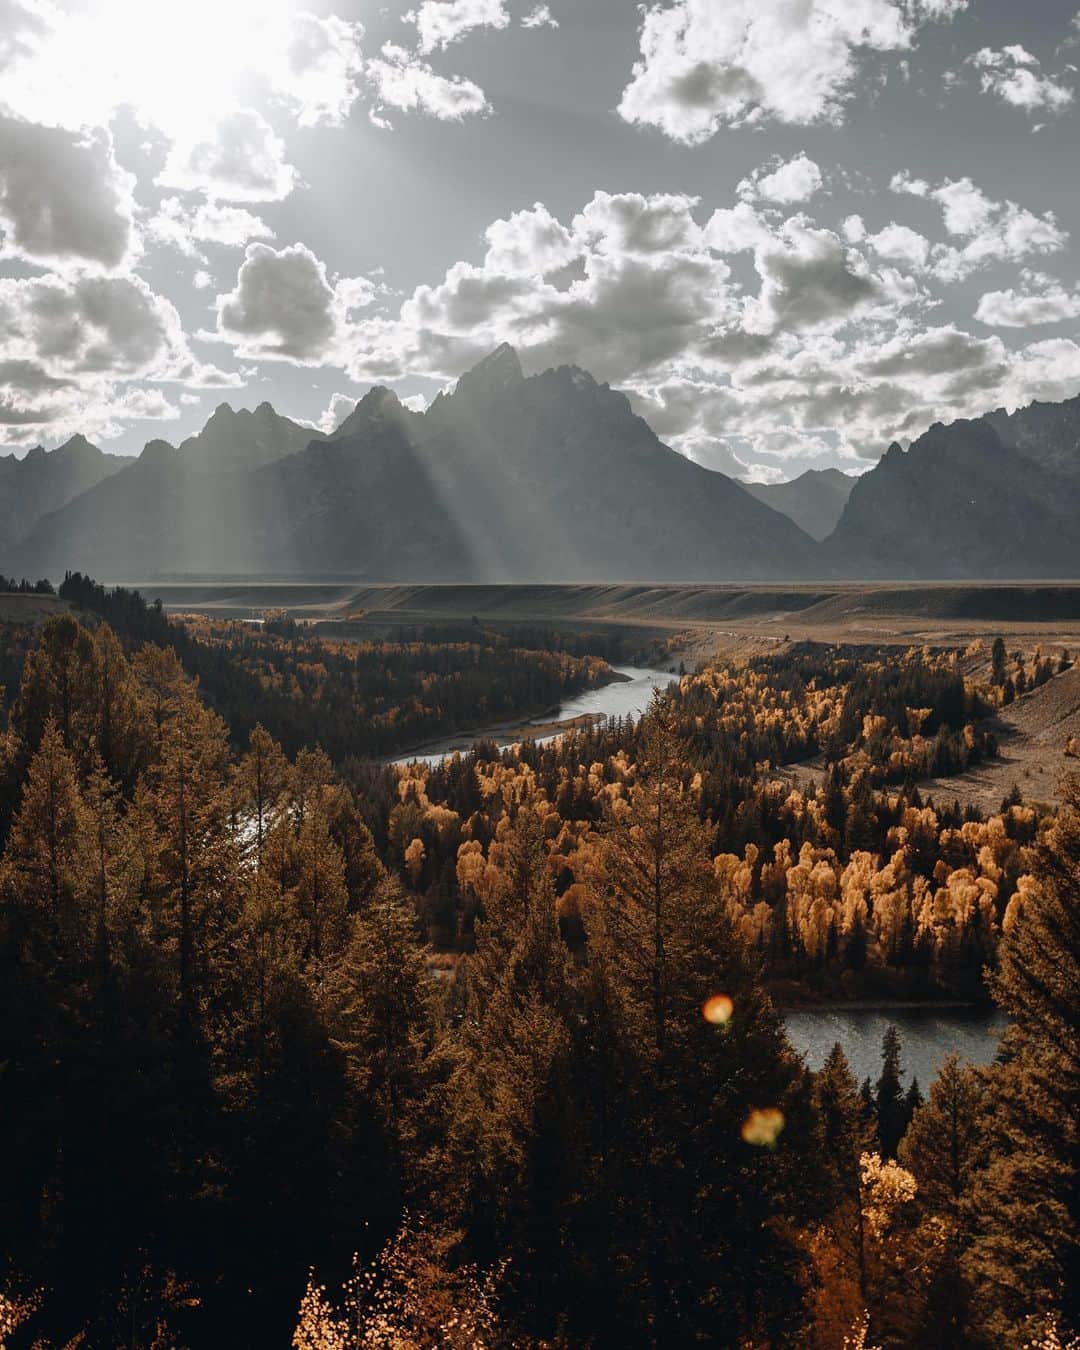 FOLKのインスタグラム：「NEW STORY: "The Grand Tetons are a church, the same way an art gallery or an orchestra hall can be a church. A church is not just a set of four walls, a few rows of seats, and a man behind a standing podium telling you how to live your life. Church is a place where your soul is fed and nourished. It’s a place where the body and mind can slow down and receive the goodness and blessing of a loving father. Works of art hanging in a gallery can speak that into people, music played by an orchestral ensemble can speak that into people. I like to think that there are places on earth, natural places, that God designed and created for that purpose; To speak beauty, righteousness, and truth into people’s souls and spirits. The first time I laid eyes on the majestic peaks, I cried. Not because it made me sad or emotional, but because it was true." — @jkwinders || FULL STORY ON THE WEBSITE」